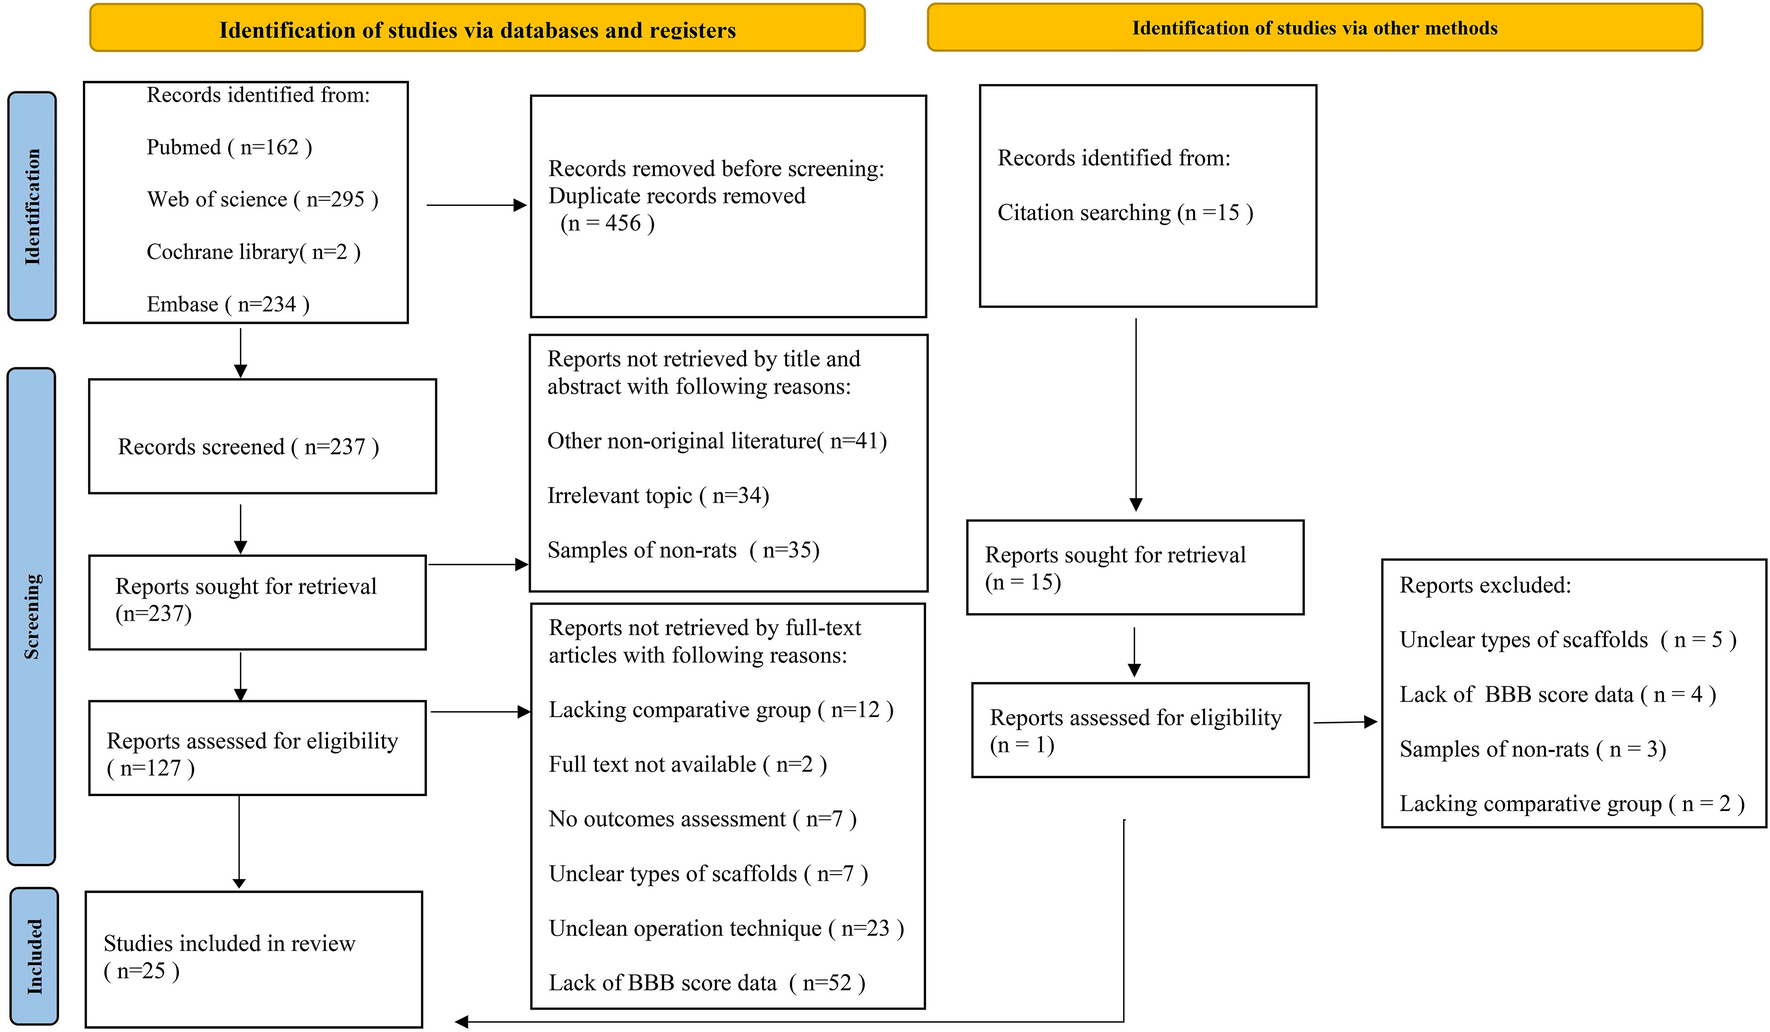 The Efficacy of Different Material Scaffold-Guided Cell Transplantation in the Treatment of Spinal Cord Injury in Rats: A Systematic Review and Network Meta-analysis